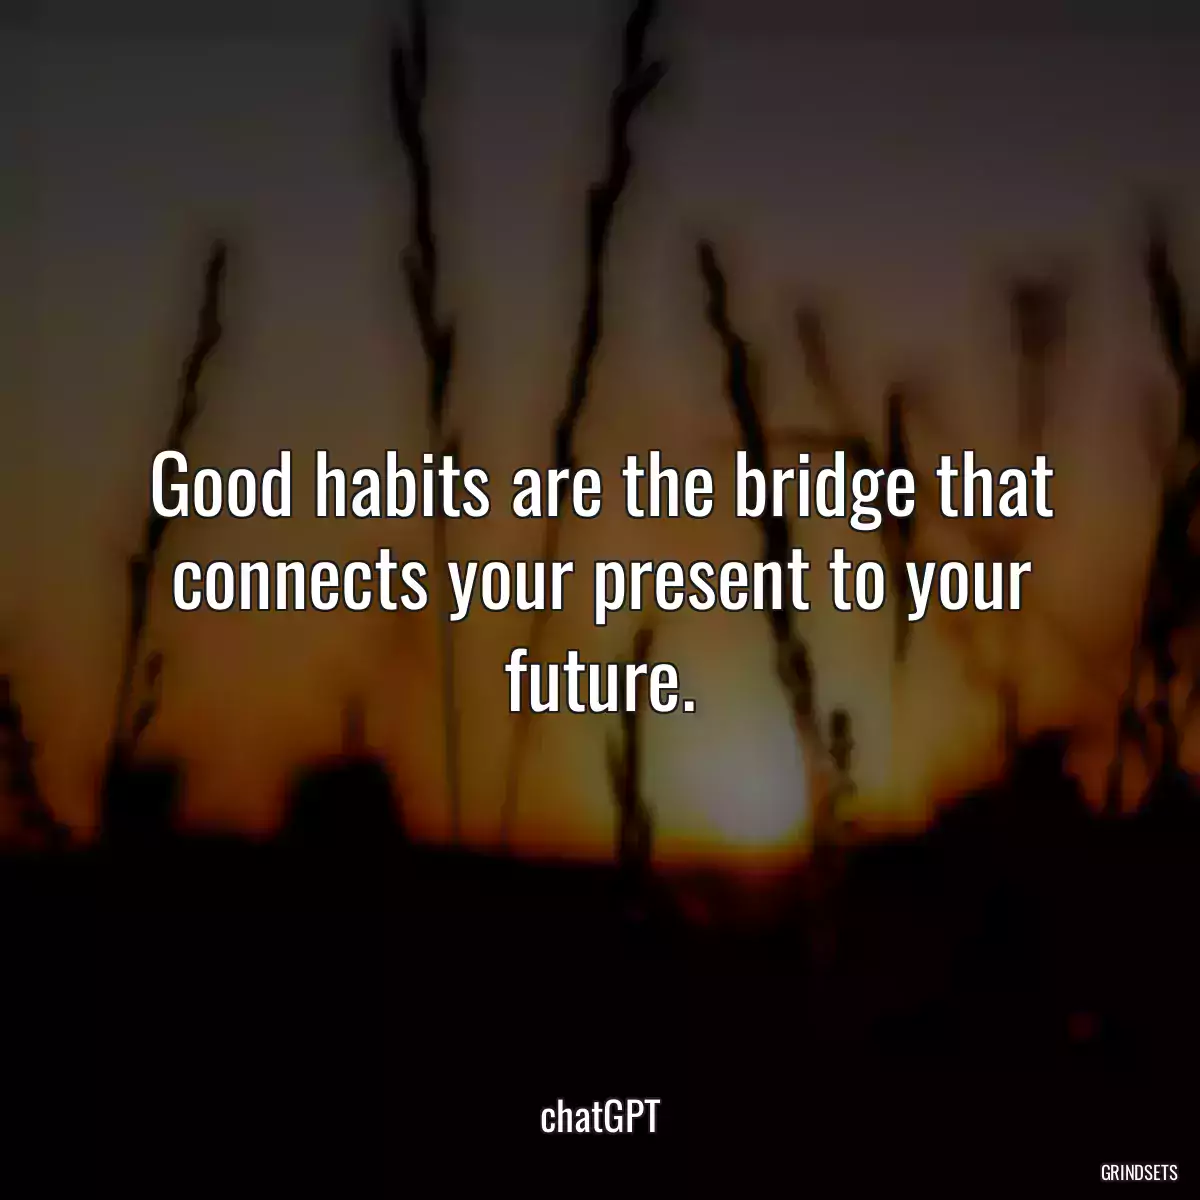 Good habits are the bridge that connects your present to your future.